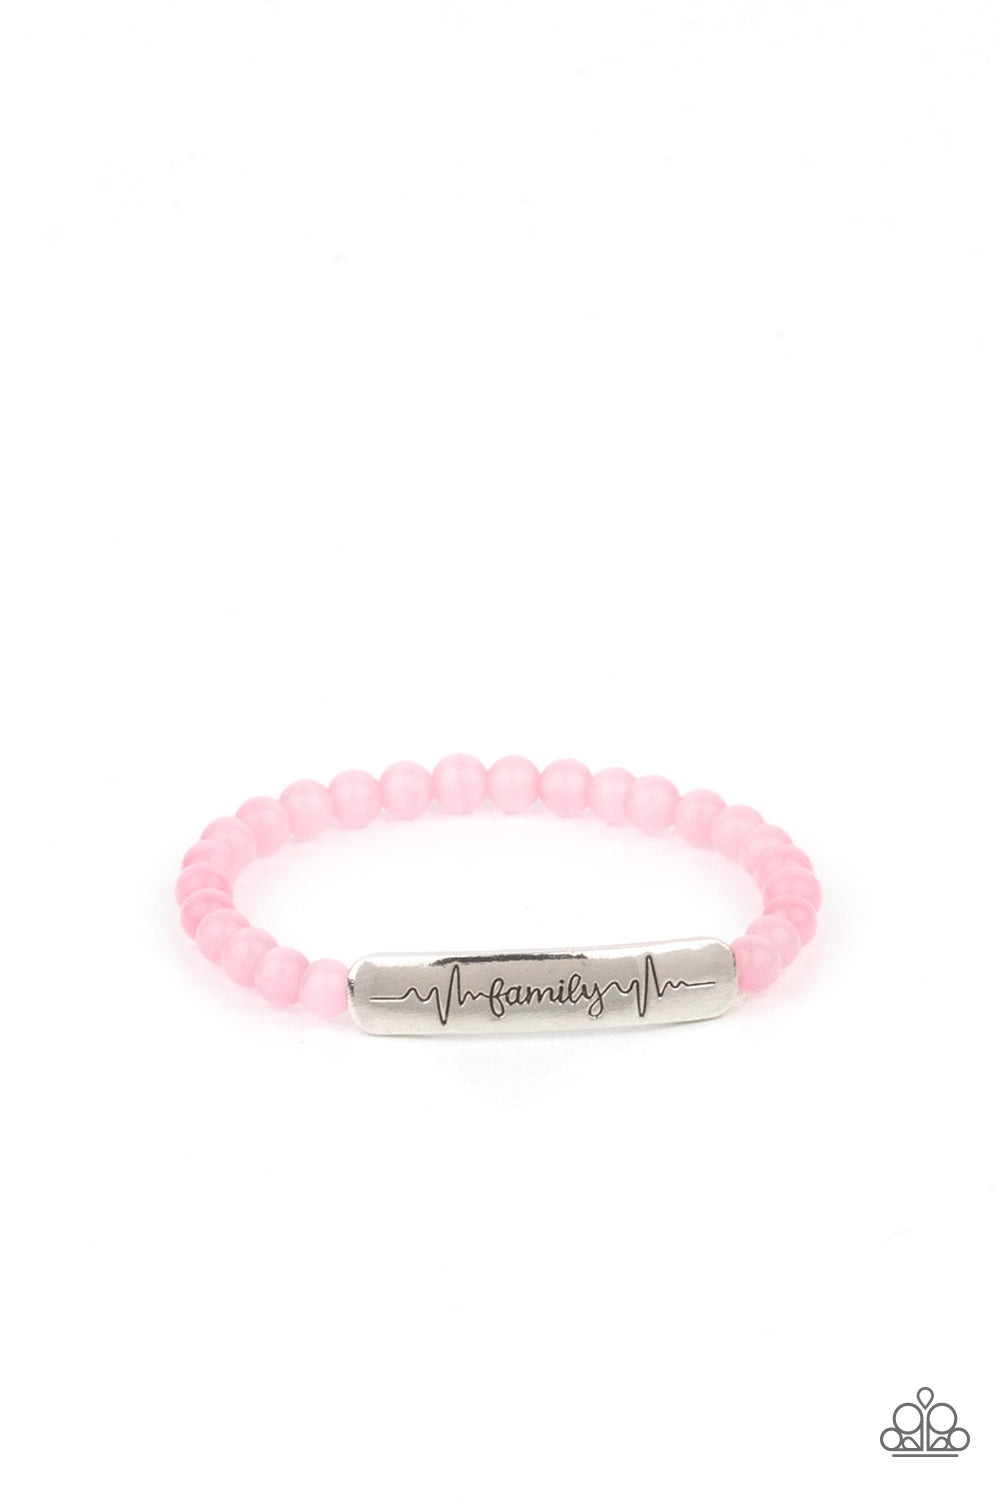 Family is Forever - Pink Cat's Eye Stone and Silver - Bracelet - Paparazzi Accessories - Stamped in heartbeats and the word, "Family," a shiny silver plate attaches to a strand of pink cat's eye stone beads that are threaded along a stretchy band, creating a whimsically sentimental centerpiece around the wrist - Bejeweled Accessories By Kristie - Trendy fashion jewelry for everyone -